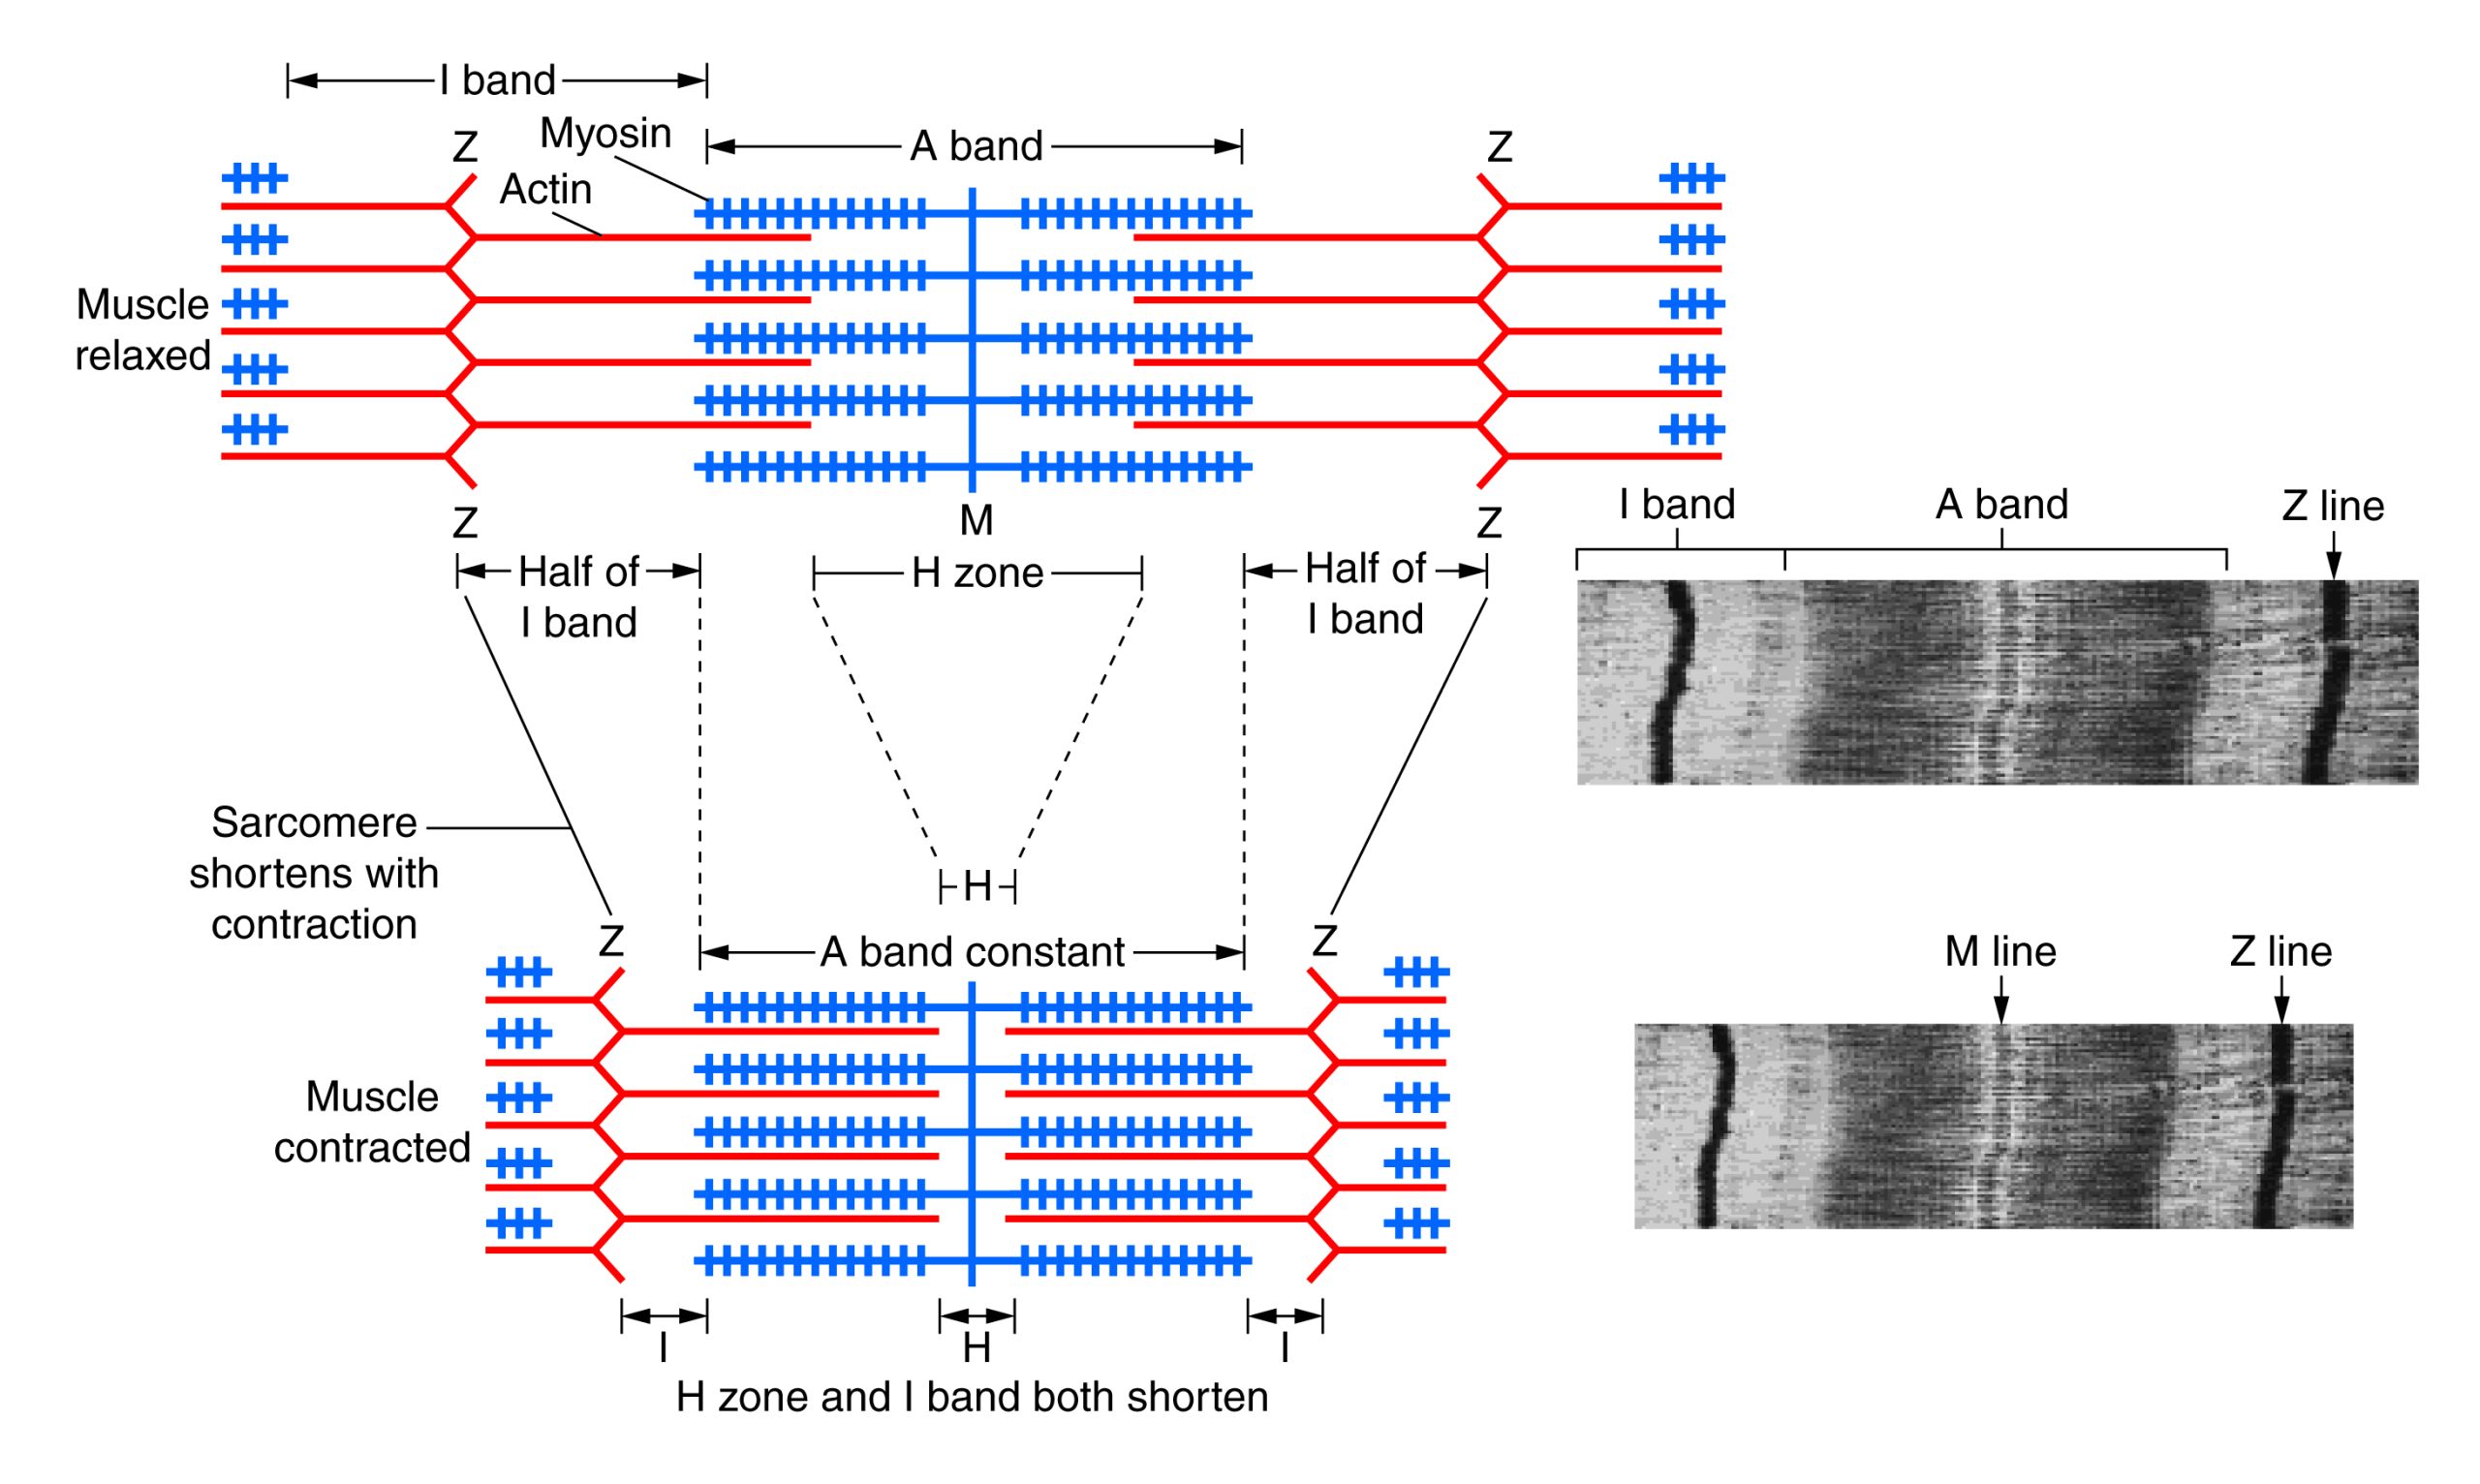 This figure demonstrates the striated pattern of myosin and actin molecules within the muscle. Also shown are the different zones of the sarcomere.